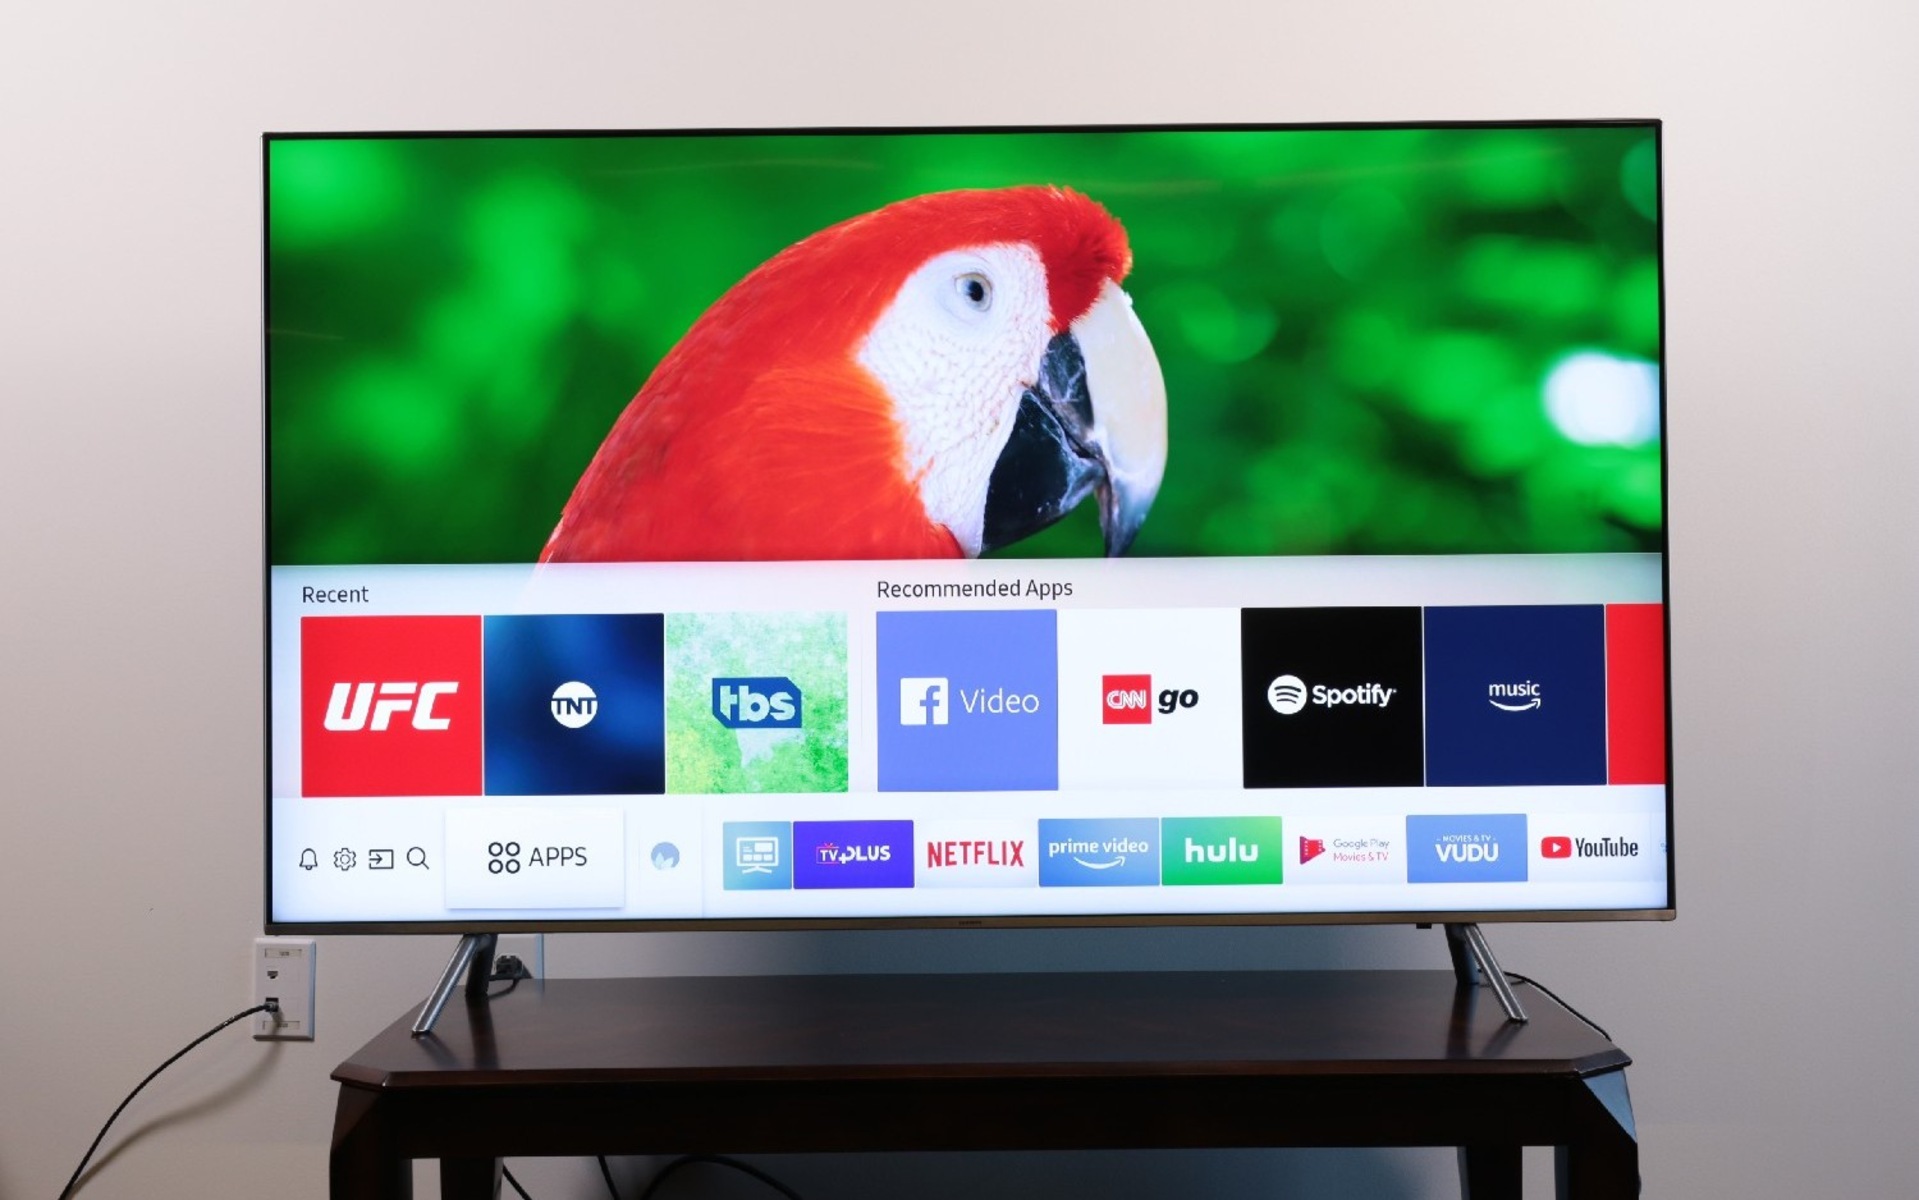 How To Access Local Digital TV Channels On A Samsung QLED TV